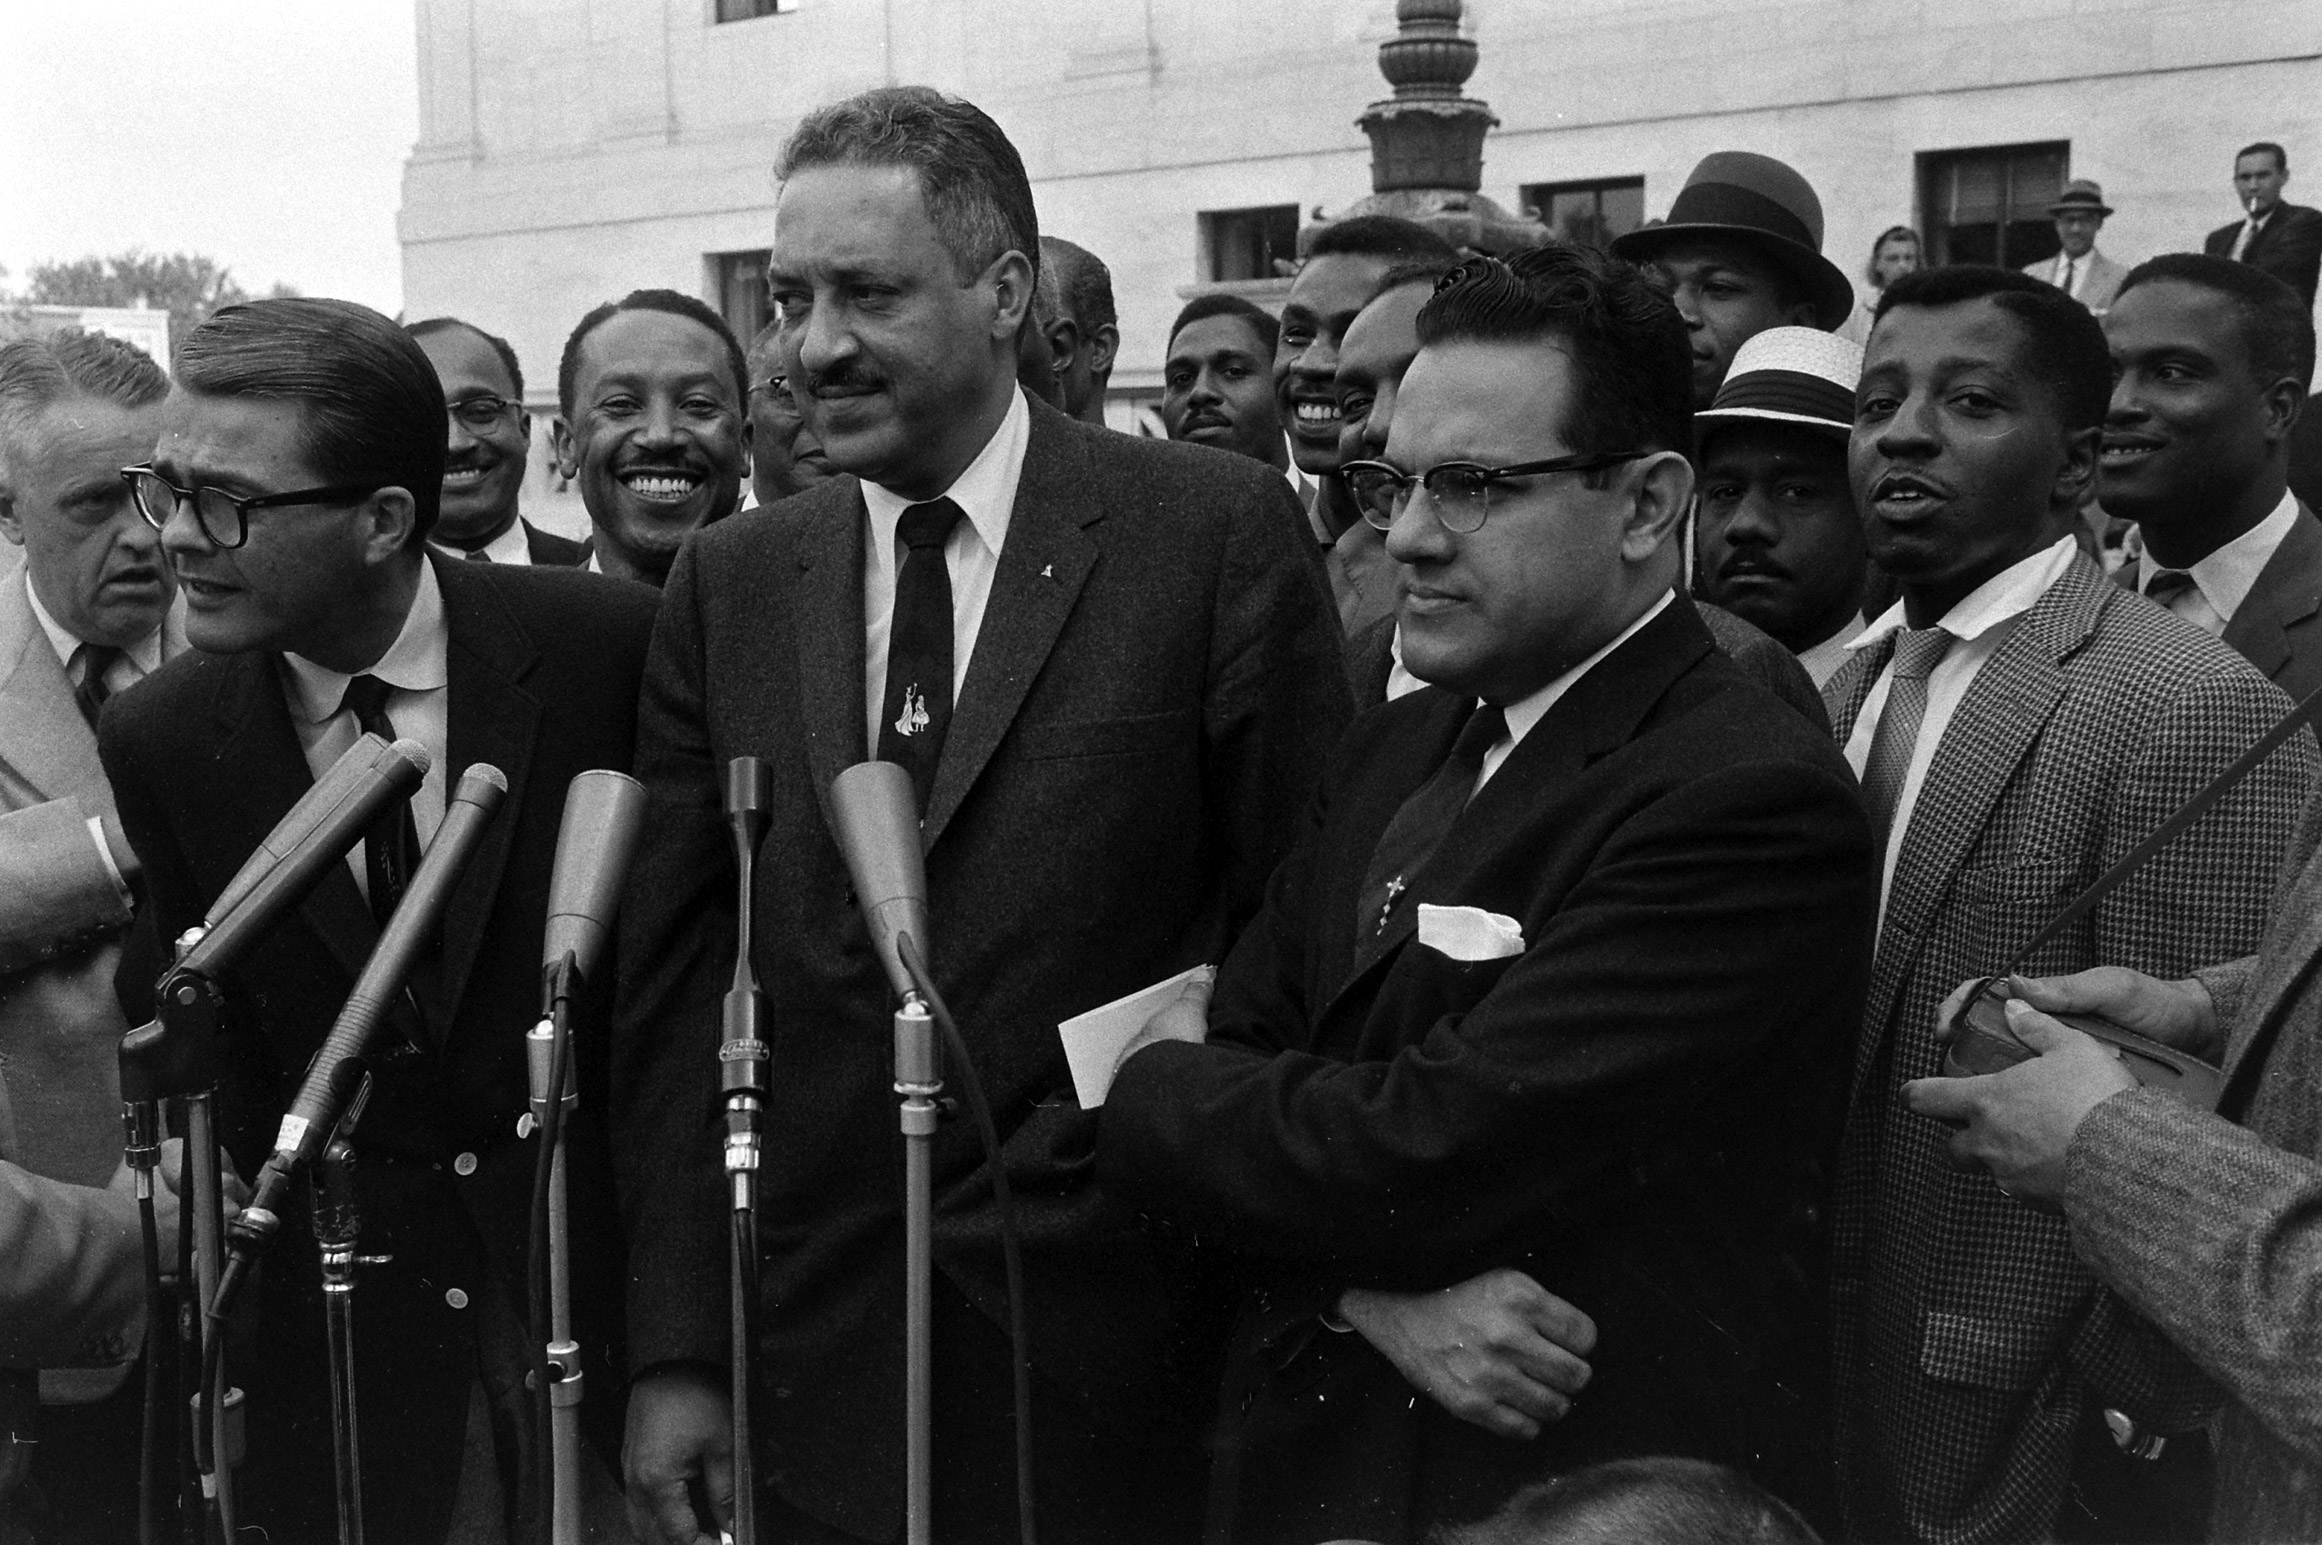 Thurgood Marshall speaking in front of the U.S. Supreme Court after Court's upholding Little Rock desegregation order, 1958.